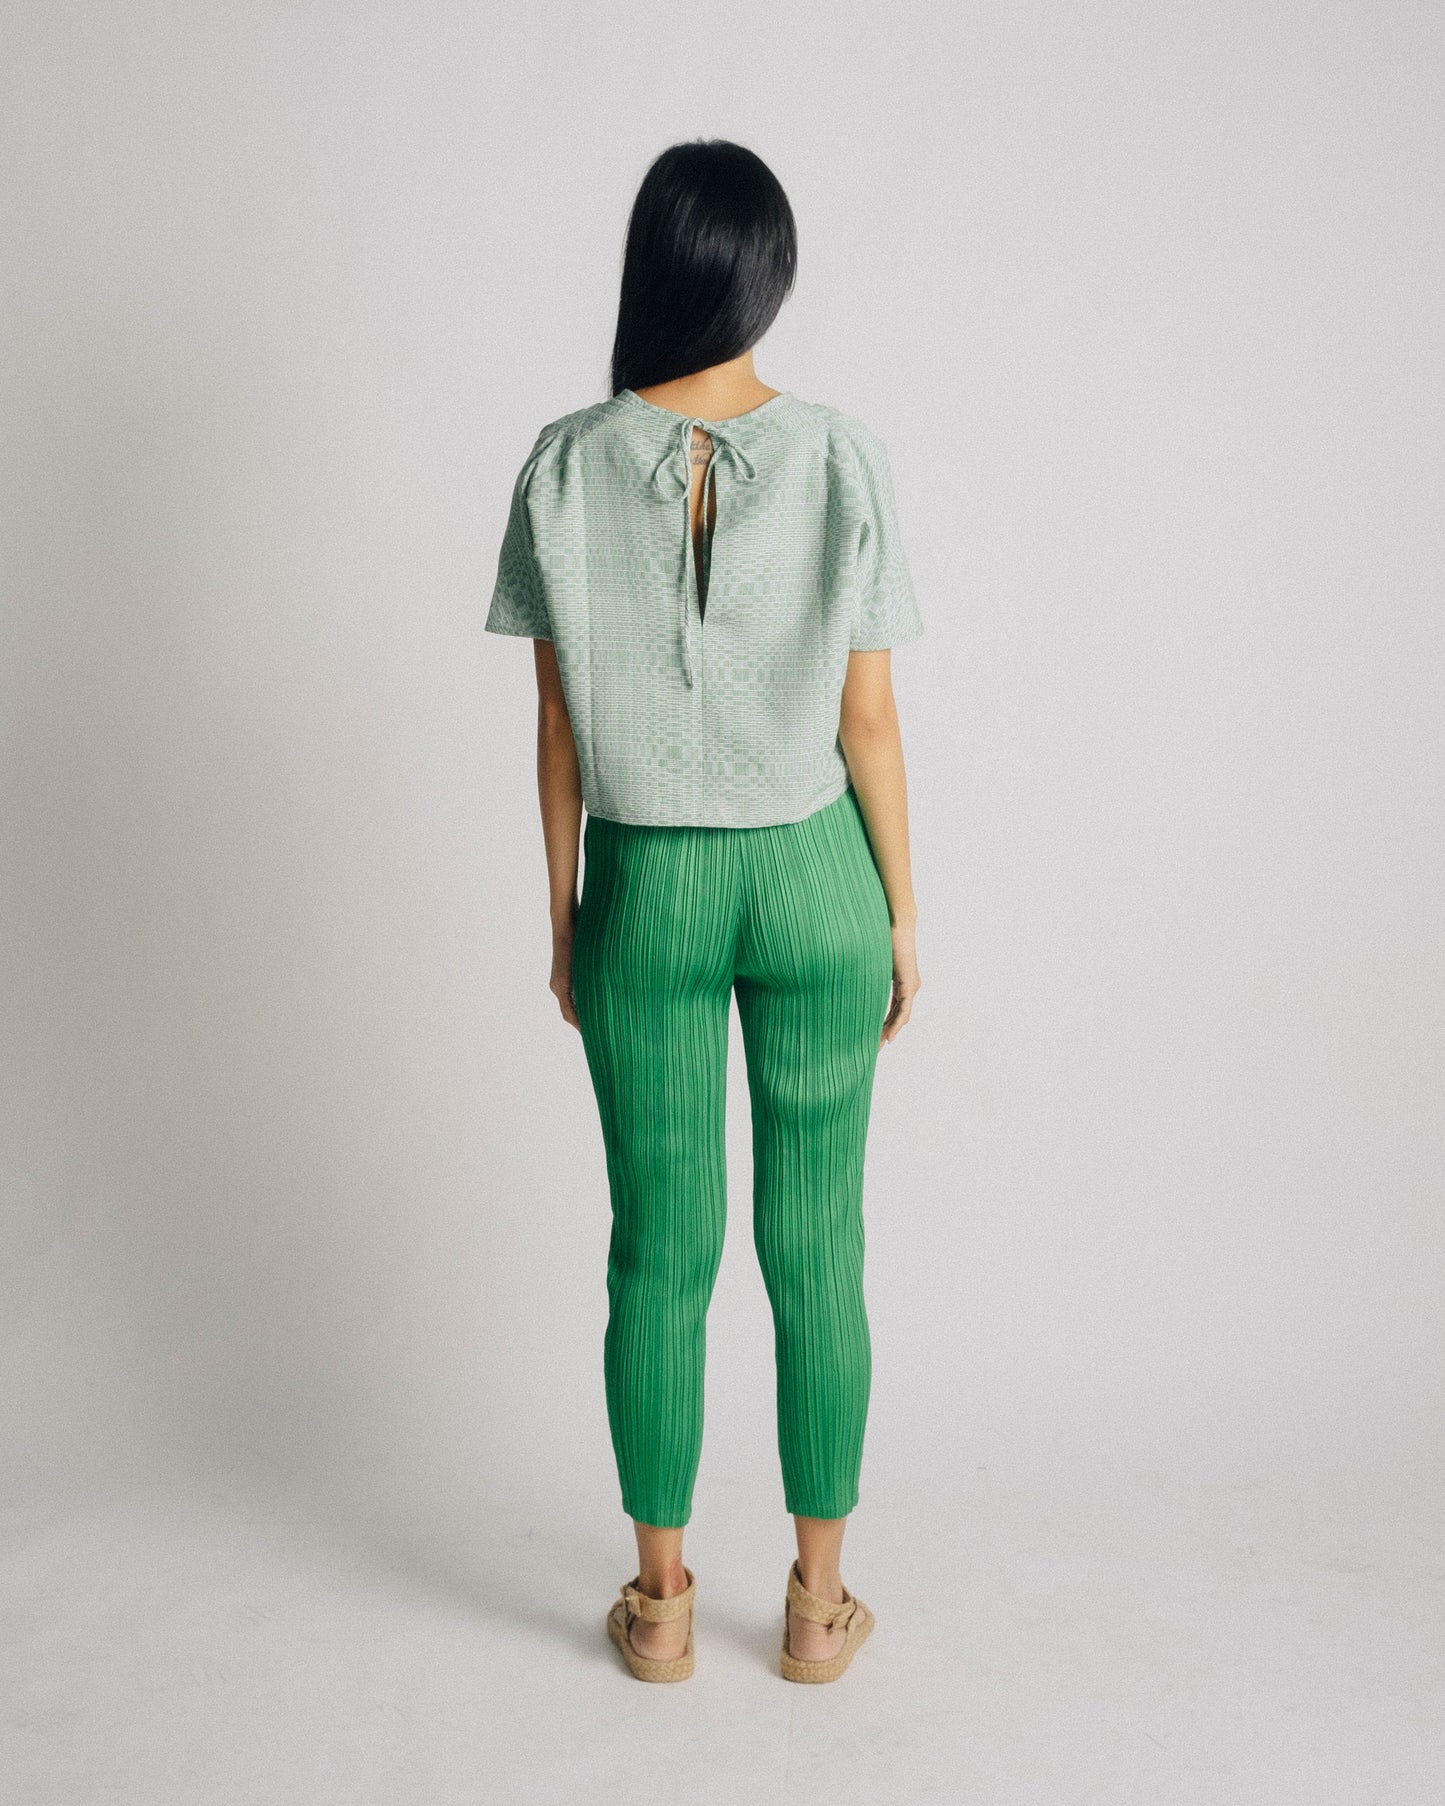 SALLY Top - Olive